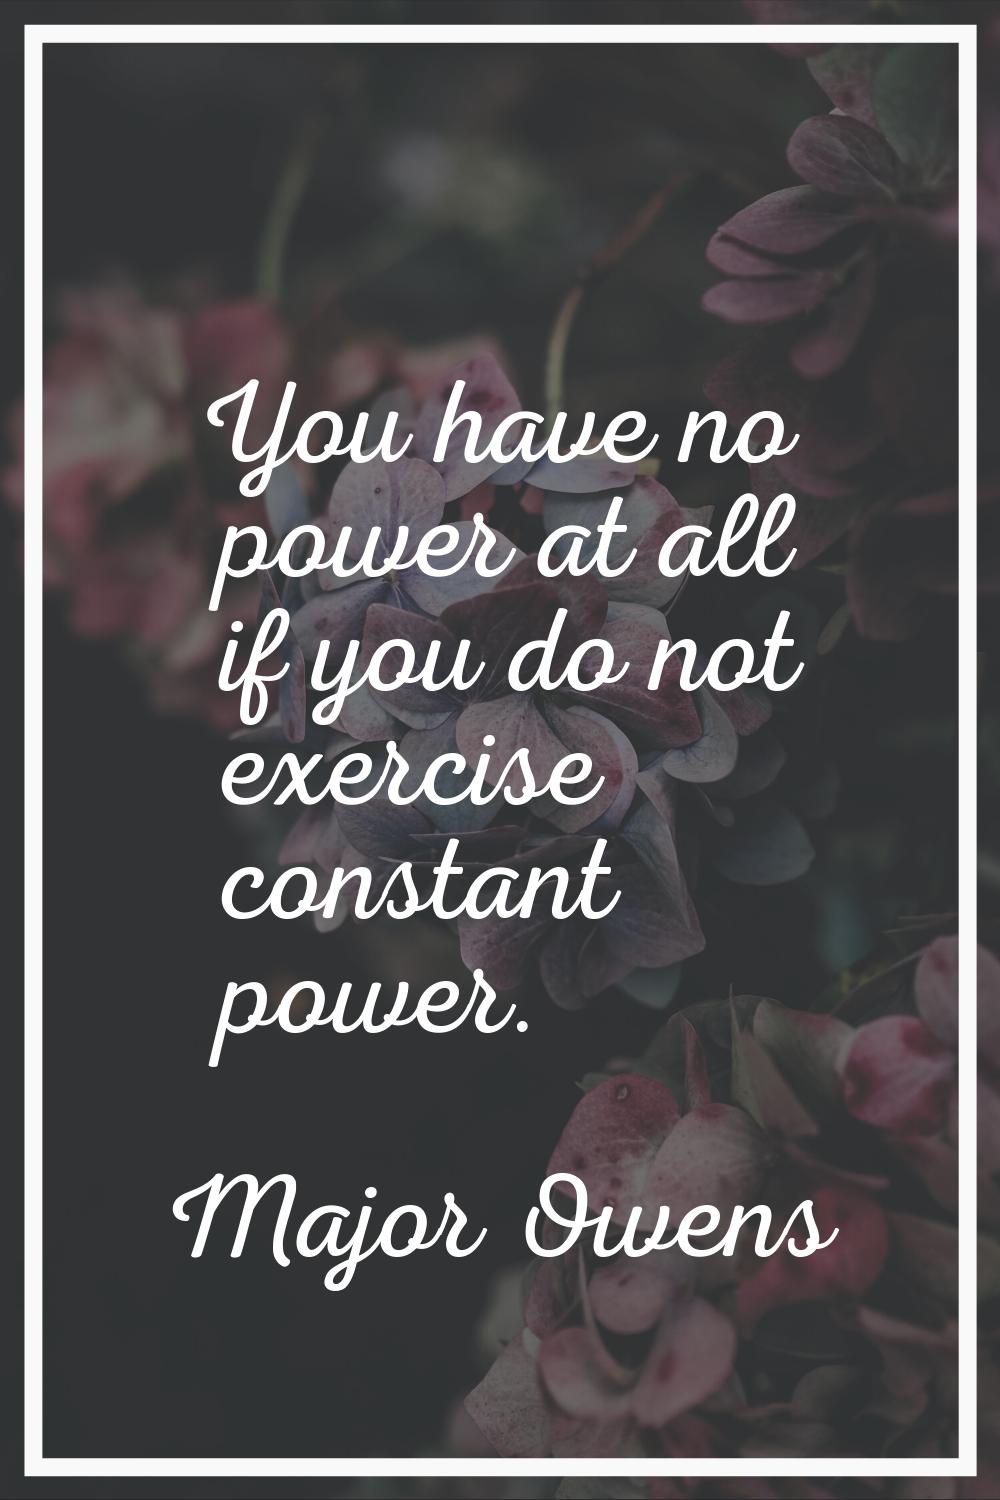 You have no power at all if you do not exercise constant power.